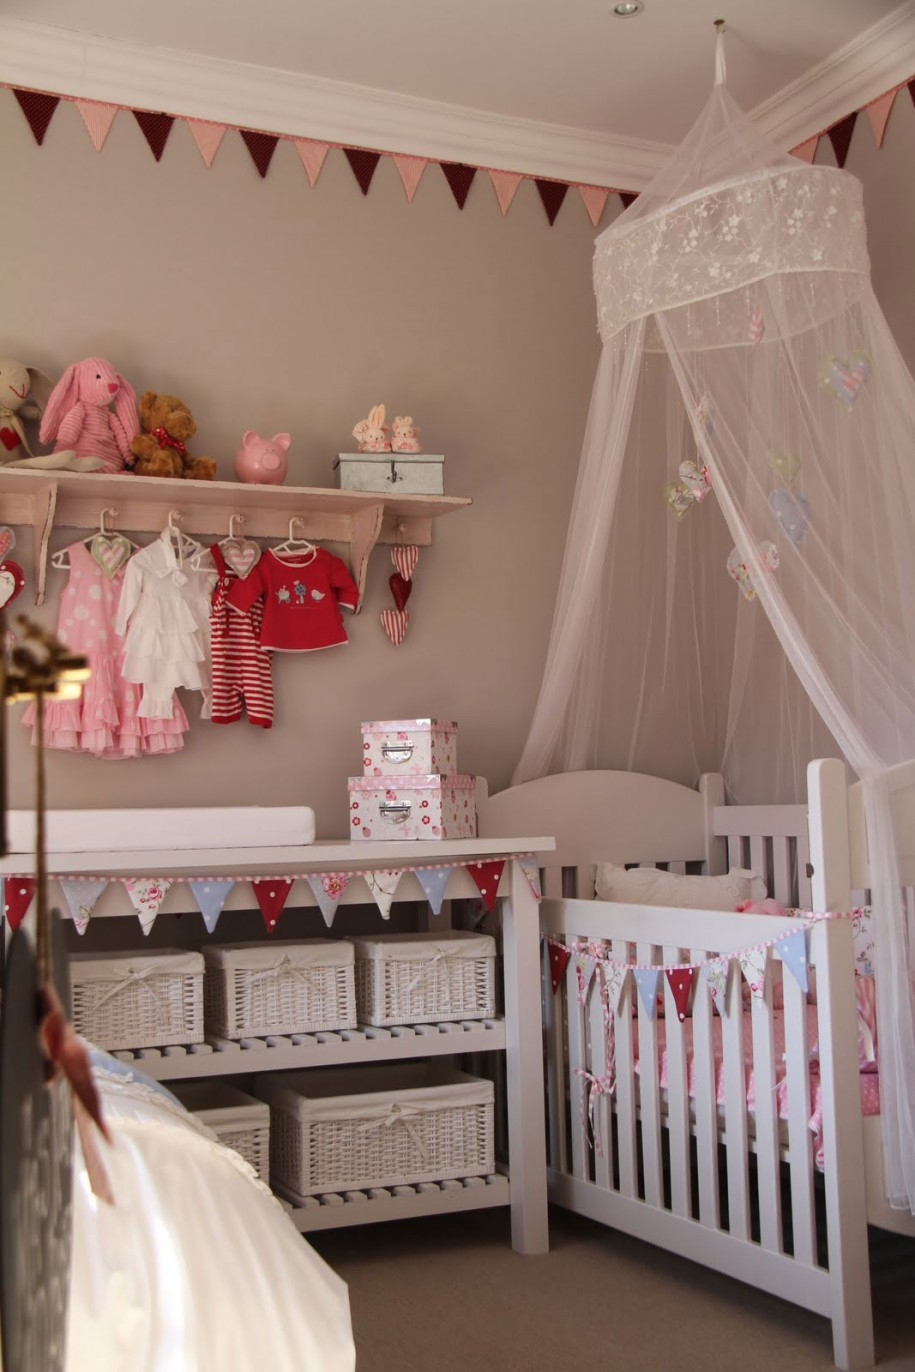 DIY Baby Room Ideas
 Antique Baby Room Ideas Designed for Modern House